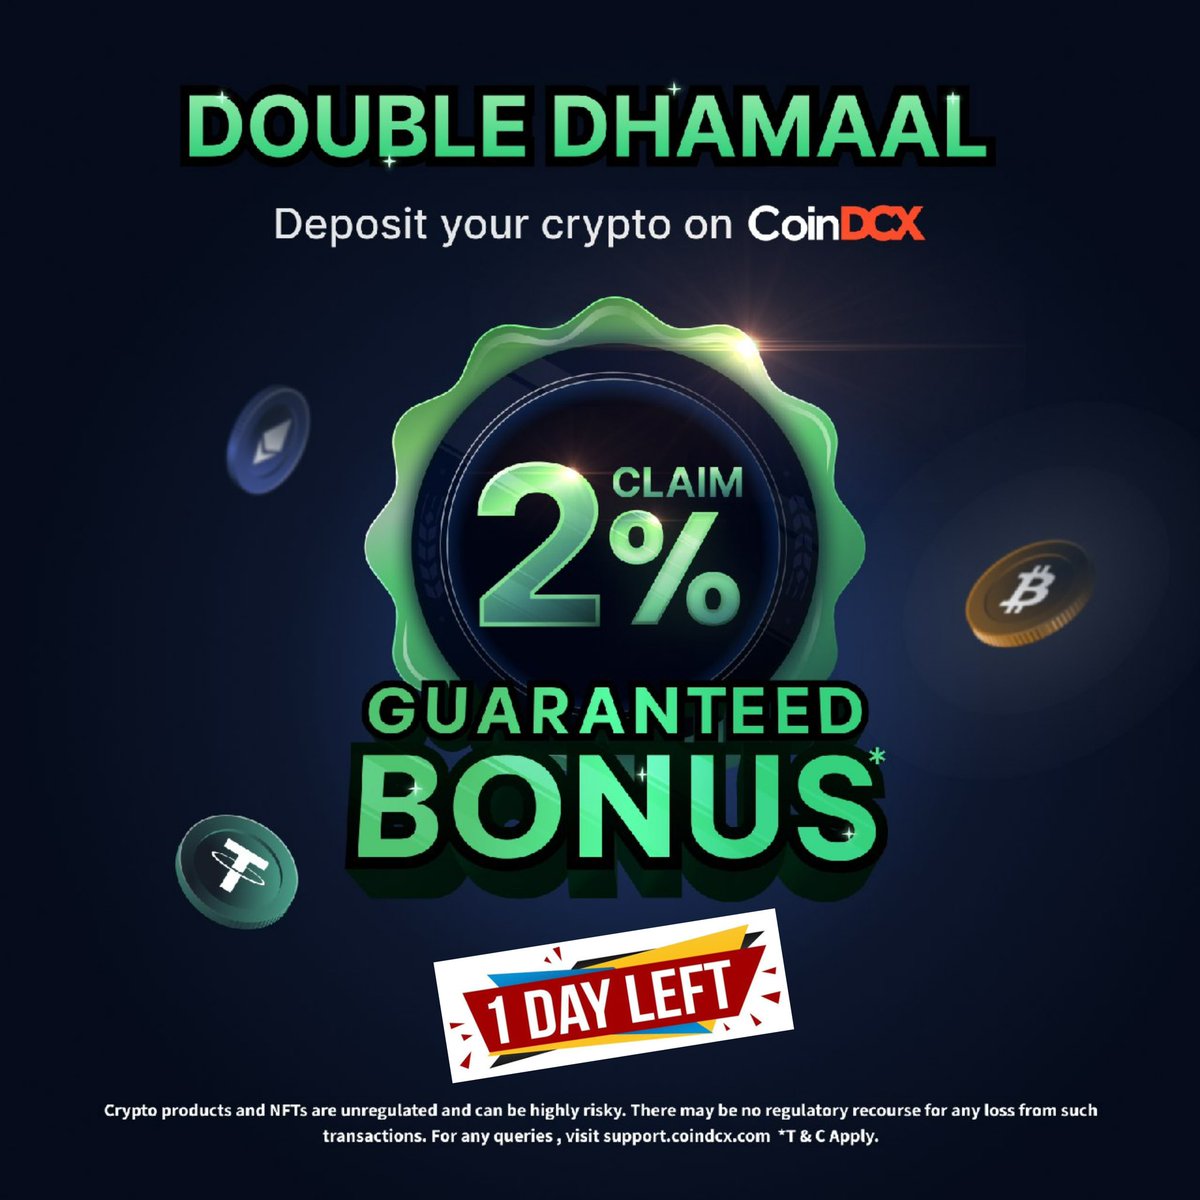 Exciting News 🚀

Double your gains with @CoinDCX's #DoubleDhamaal offer 🔥

Deposit NOW and claim a guaranteed 2% bonus 🤩

👉 join.coindcx.com/invite/m3db